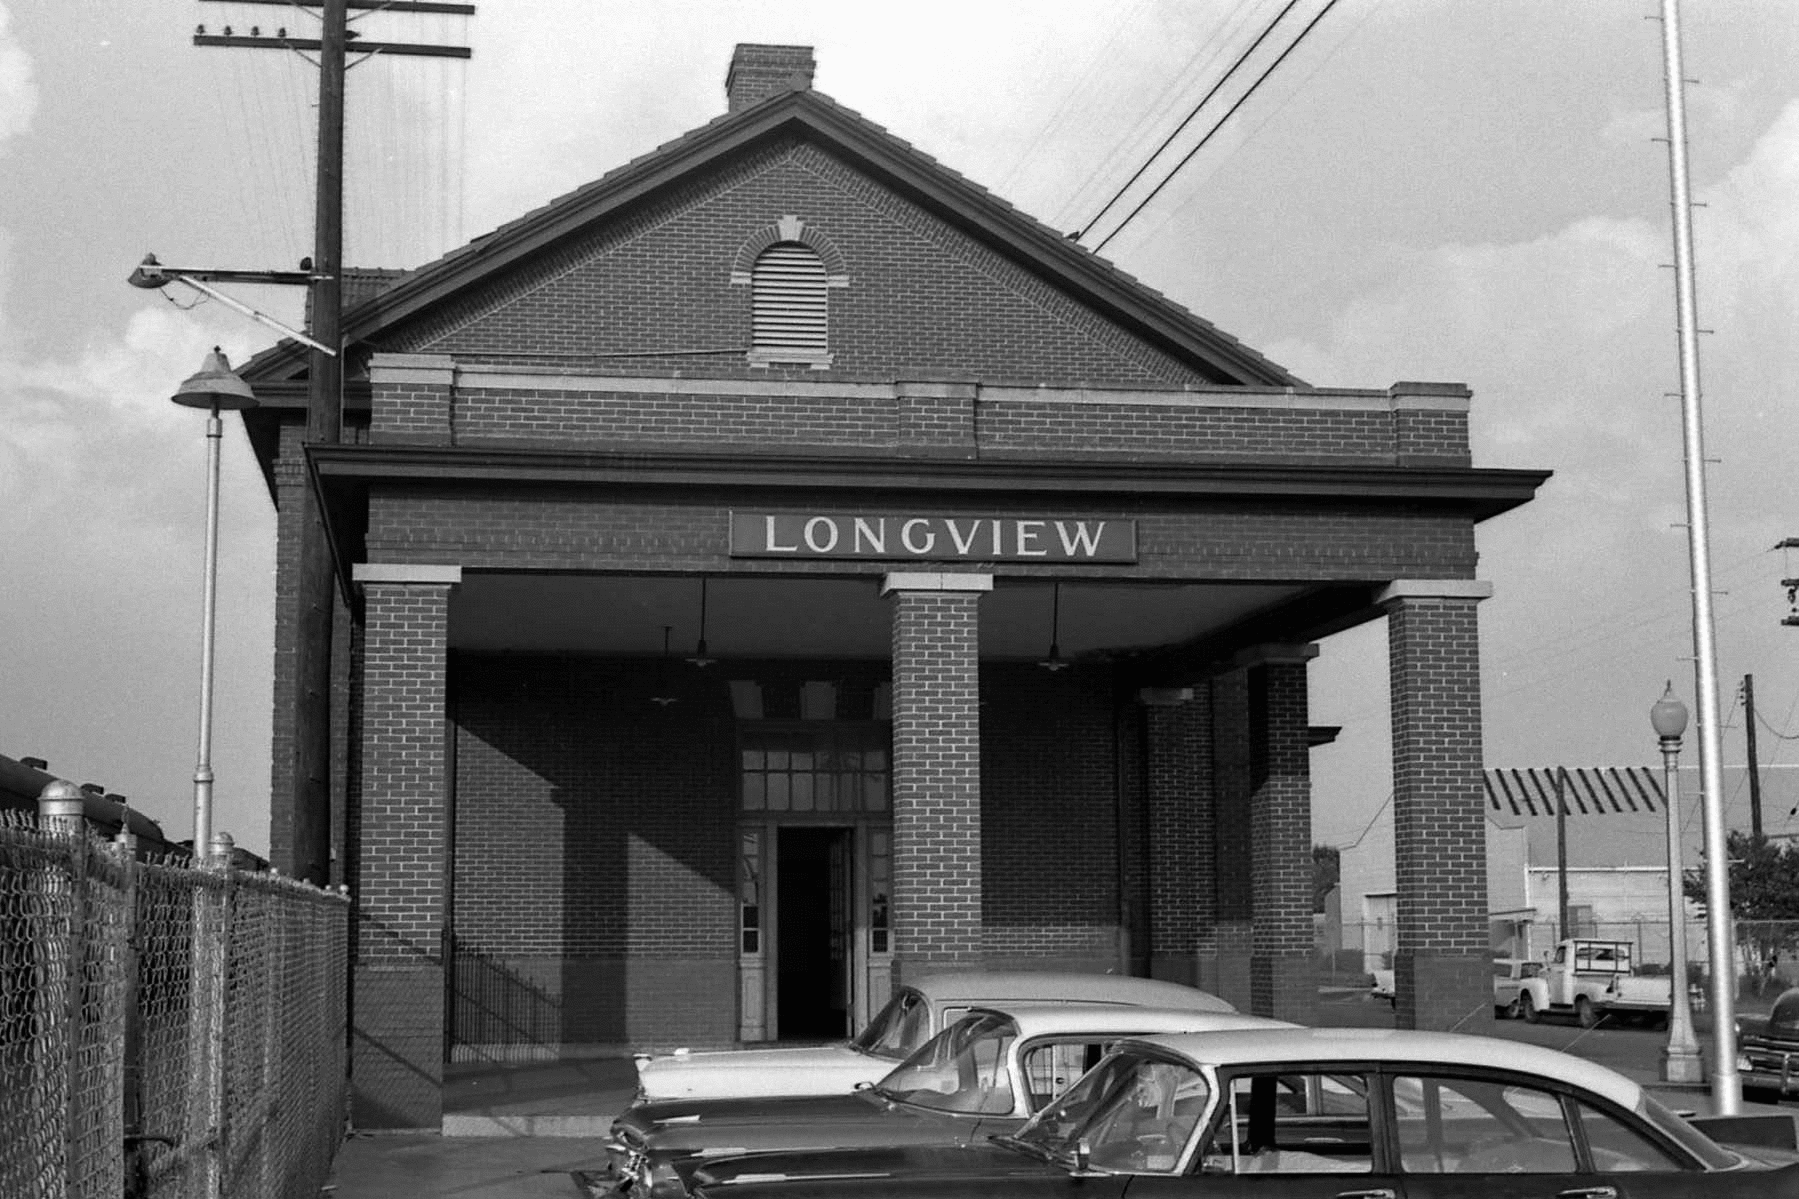 Image of T&P Stations & Structures in Longview, Texas 1963